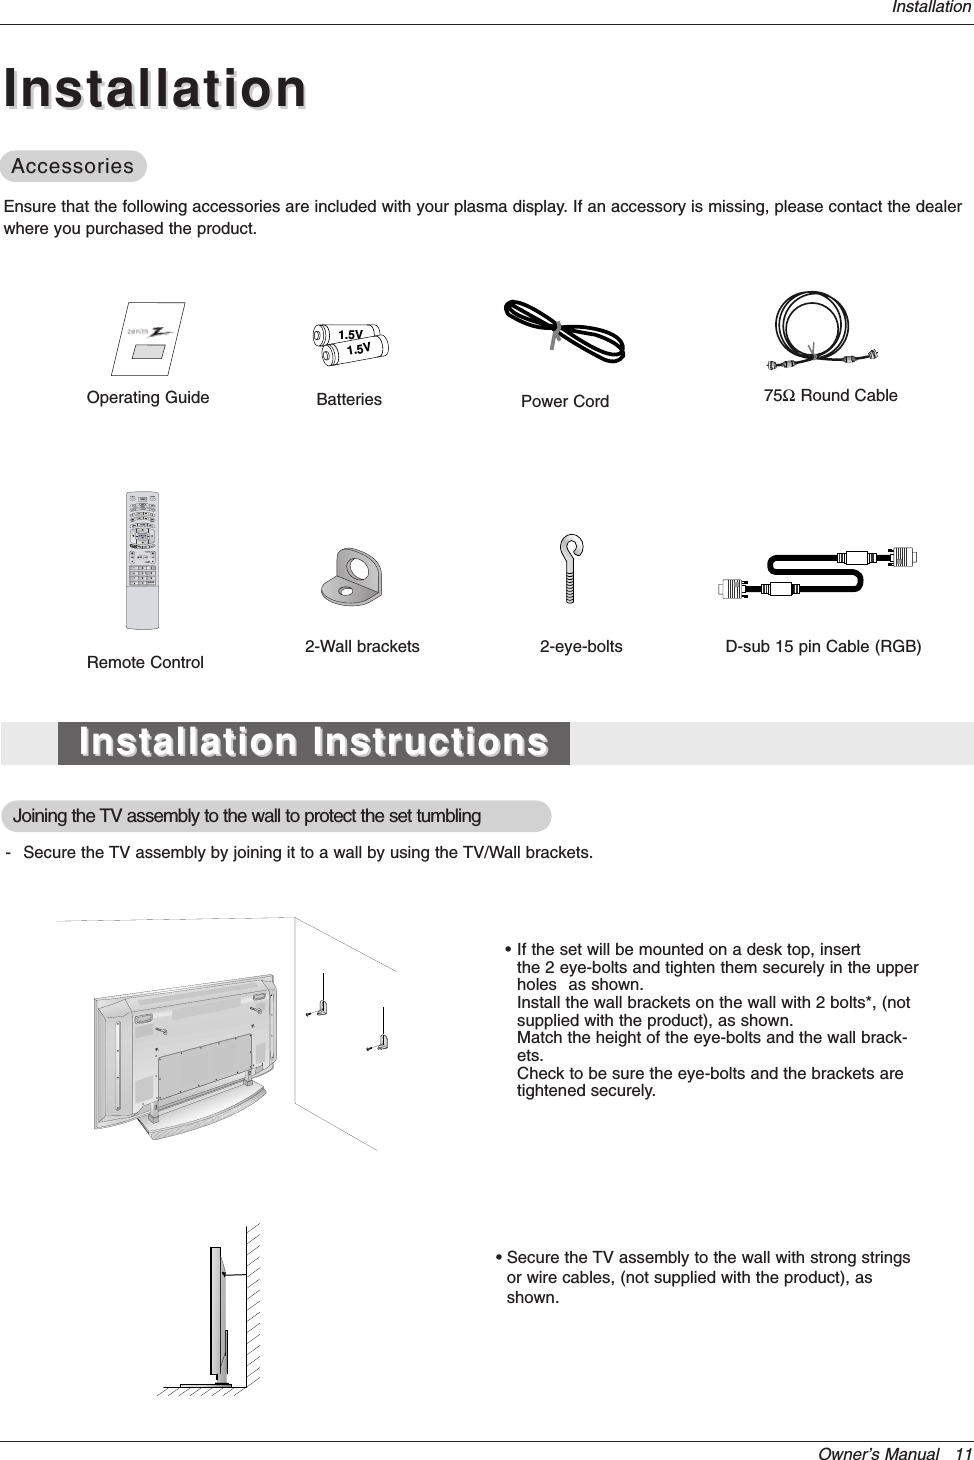 Owner’s Manual   11InstallationOperating Guide1.5V1.5VBatteries Power CordMODEDAY -DAY +FLASHBKTIMERTV INPUT TV/VIDEOEXITGUIDECC75ΩRound CableEnsure that the following accessories are included with your plasma display. If an accessory is missing, please contact the dealerwhere you purchased the product.2-Wall brackets 2-eye-boltsRemote Control- Secure the TV assembly by joining it to a wall by using the TV/Wall brackets.Joining the TV assembly to the wall to protect the set tumbling•If the set will be mounted on a desk top, insert the 2 eye-bolts and tighten them securely in the upper holes as shown.Install the wall brackets on the wall with 2 bolts*, (not supplied with the product), as shown.Match the height of the eye-bolts and the wall brack-ets.Check to be sure the eye-bolts and the brackets are tightened securely.• Secure the TV assembly to the wall with strong stringsor wire cables, (not supplied with the product), asshown.InstallationInstallationInstallation InstructionsInstallation InstructionsAccessoriesAccessoriesD-sub 15 pin Cable (RGB)